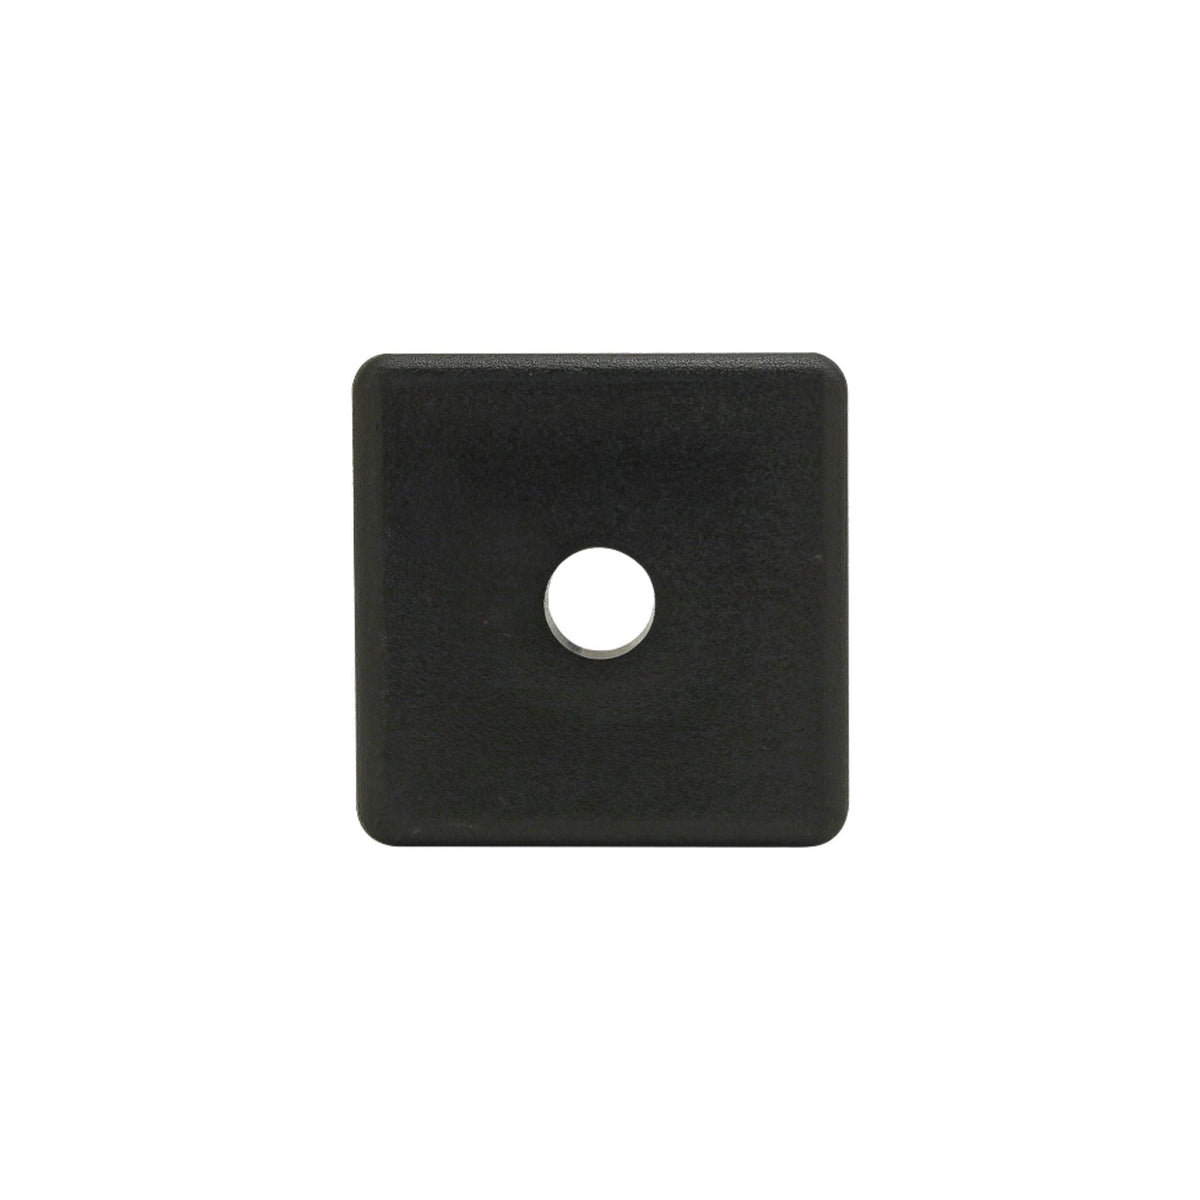 black square end cap with one hole in the center